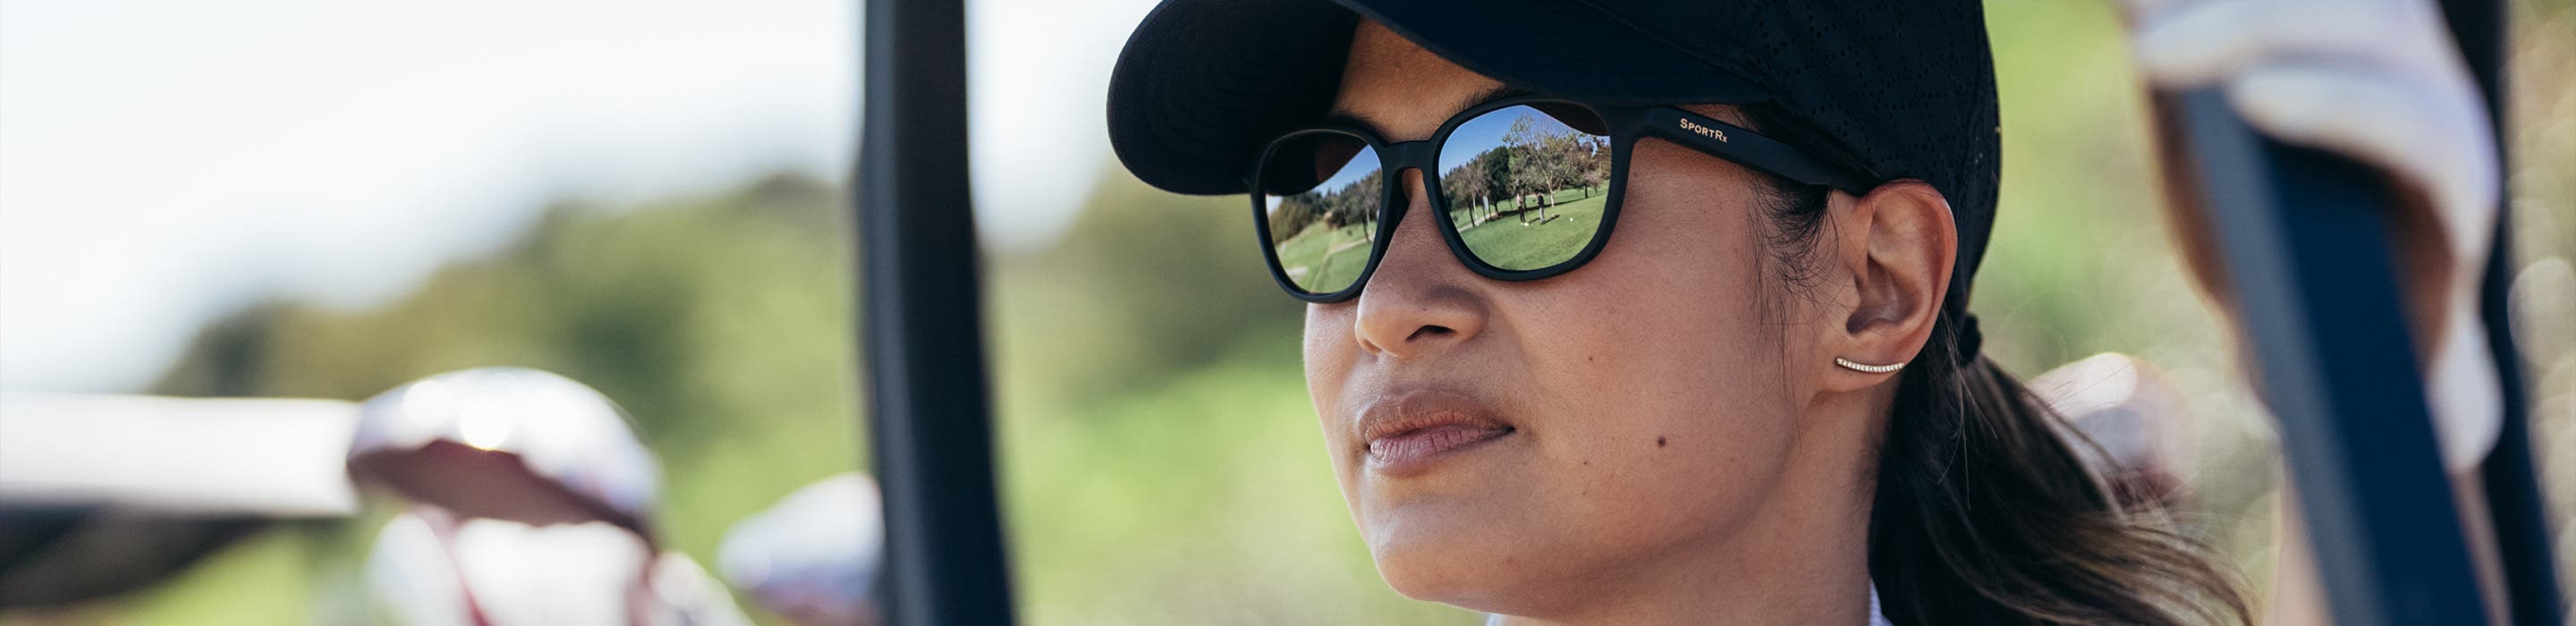 woman on a golf cart wearing SportRx women's golf sunglasses while viewing the golf course